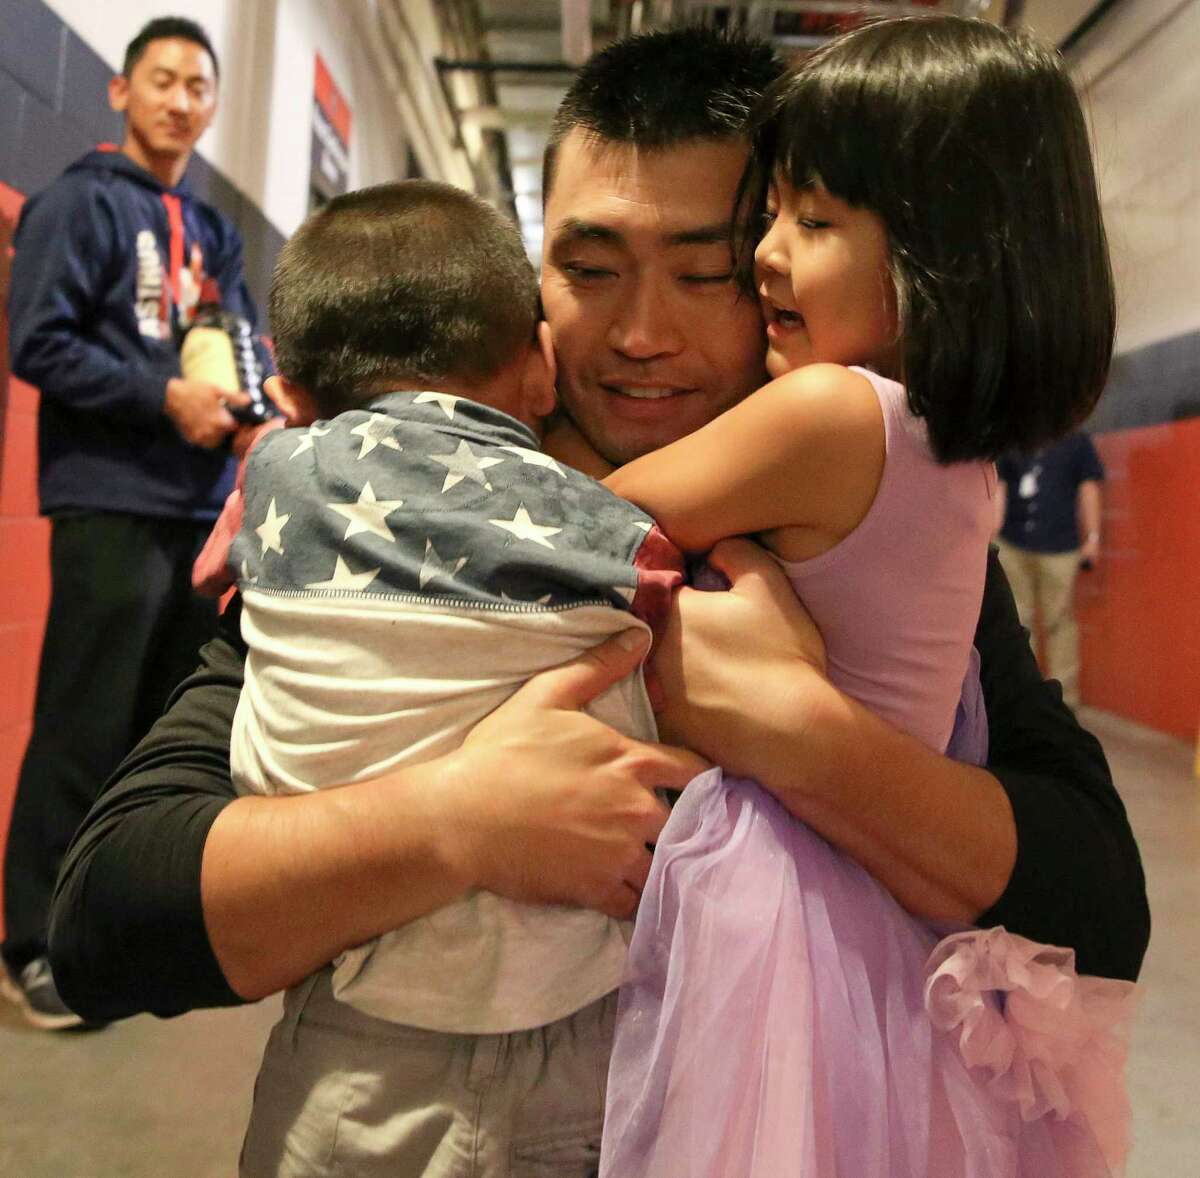 After recording his 2,000th hit as a professional in last Sunday's home game against the Angels, Astros outfielder Nori Aoki was pleased to celebrate the milestone with his son and daughter.